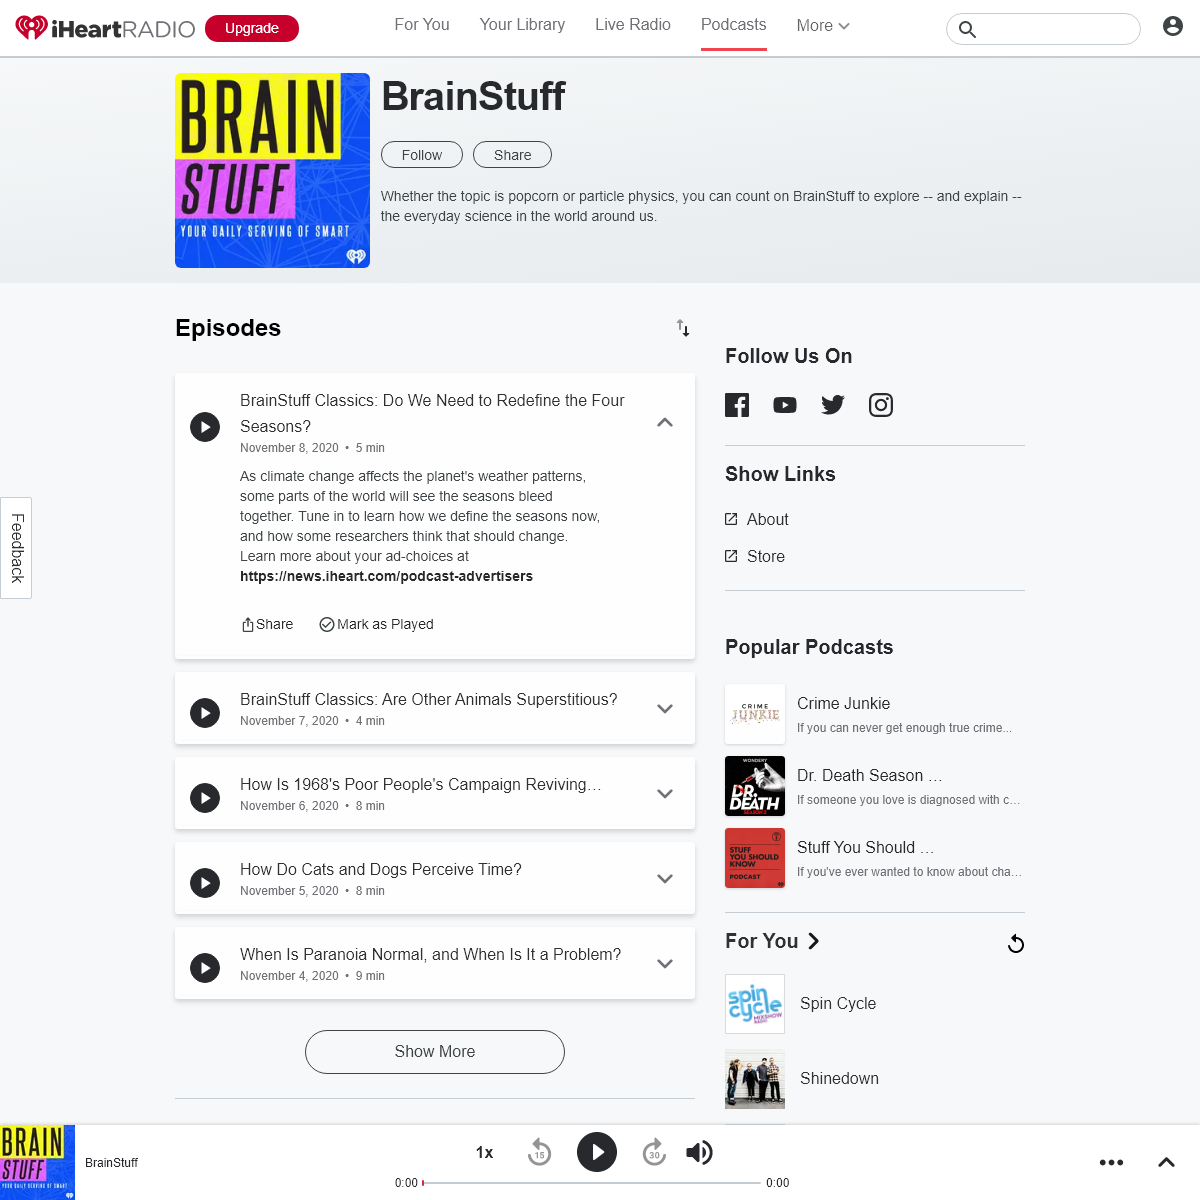 A complete backup of brainstuffshow.com